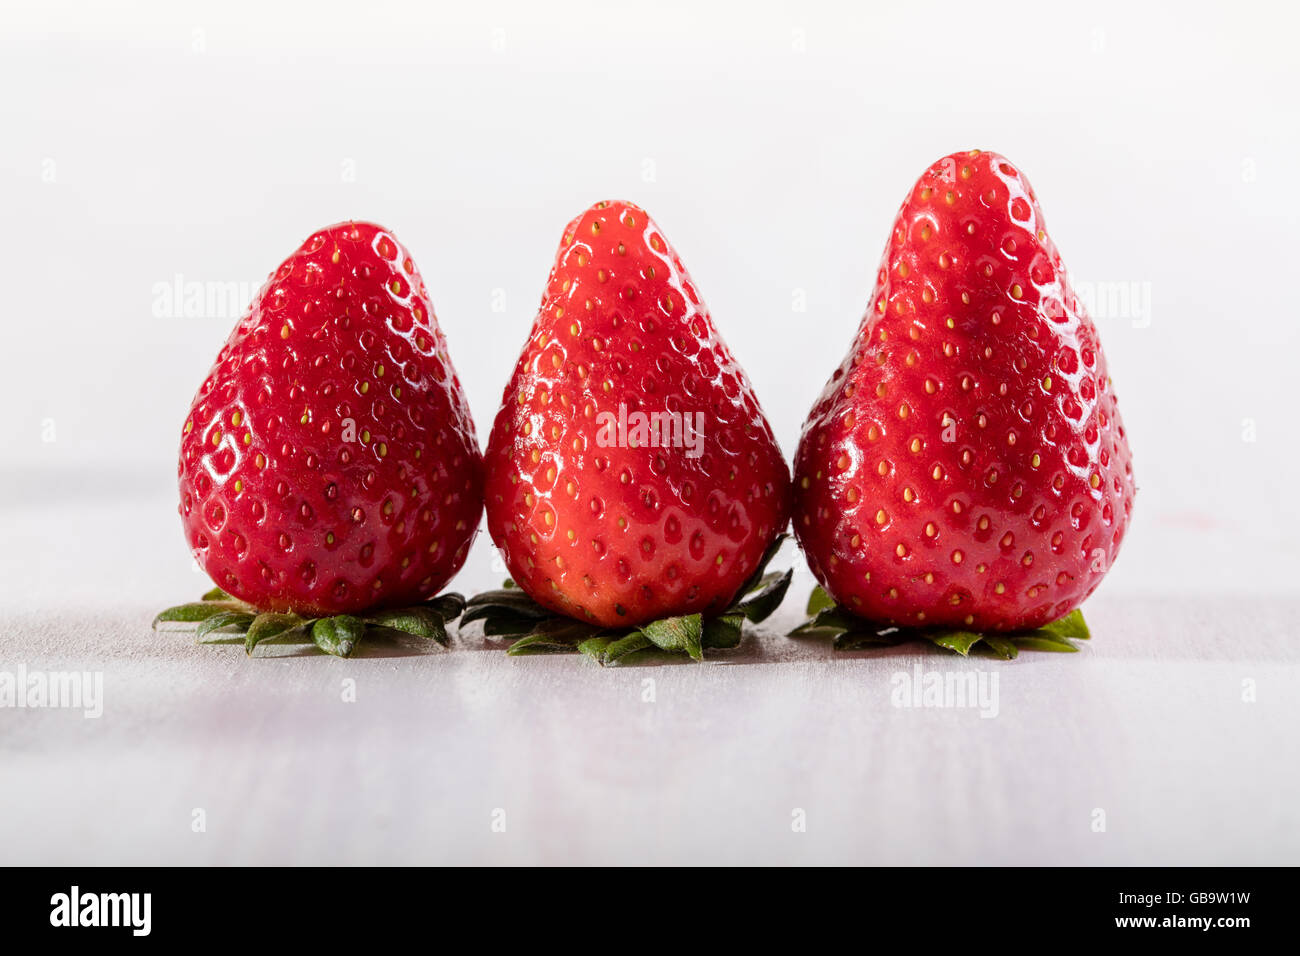 Three juicy strawberry on the table Stock Photo